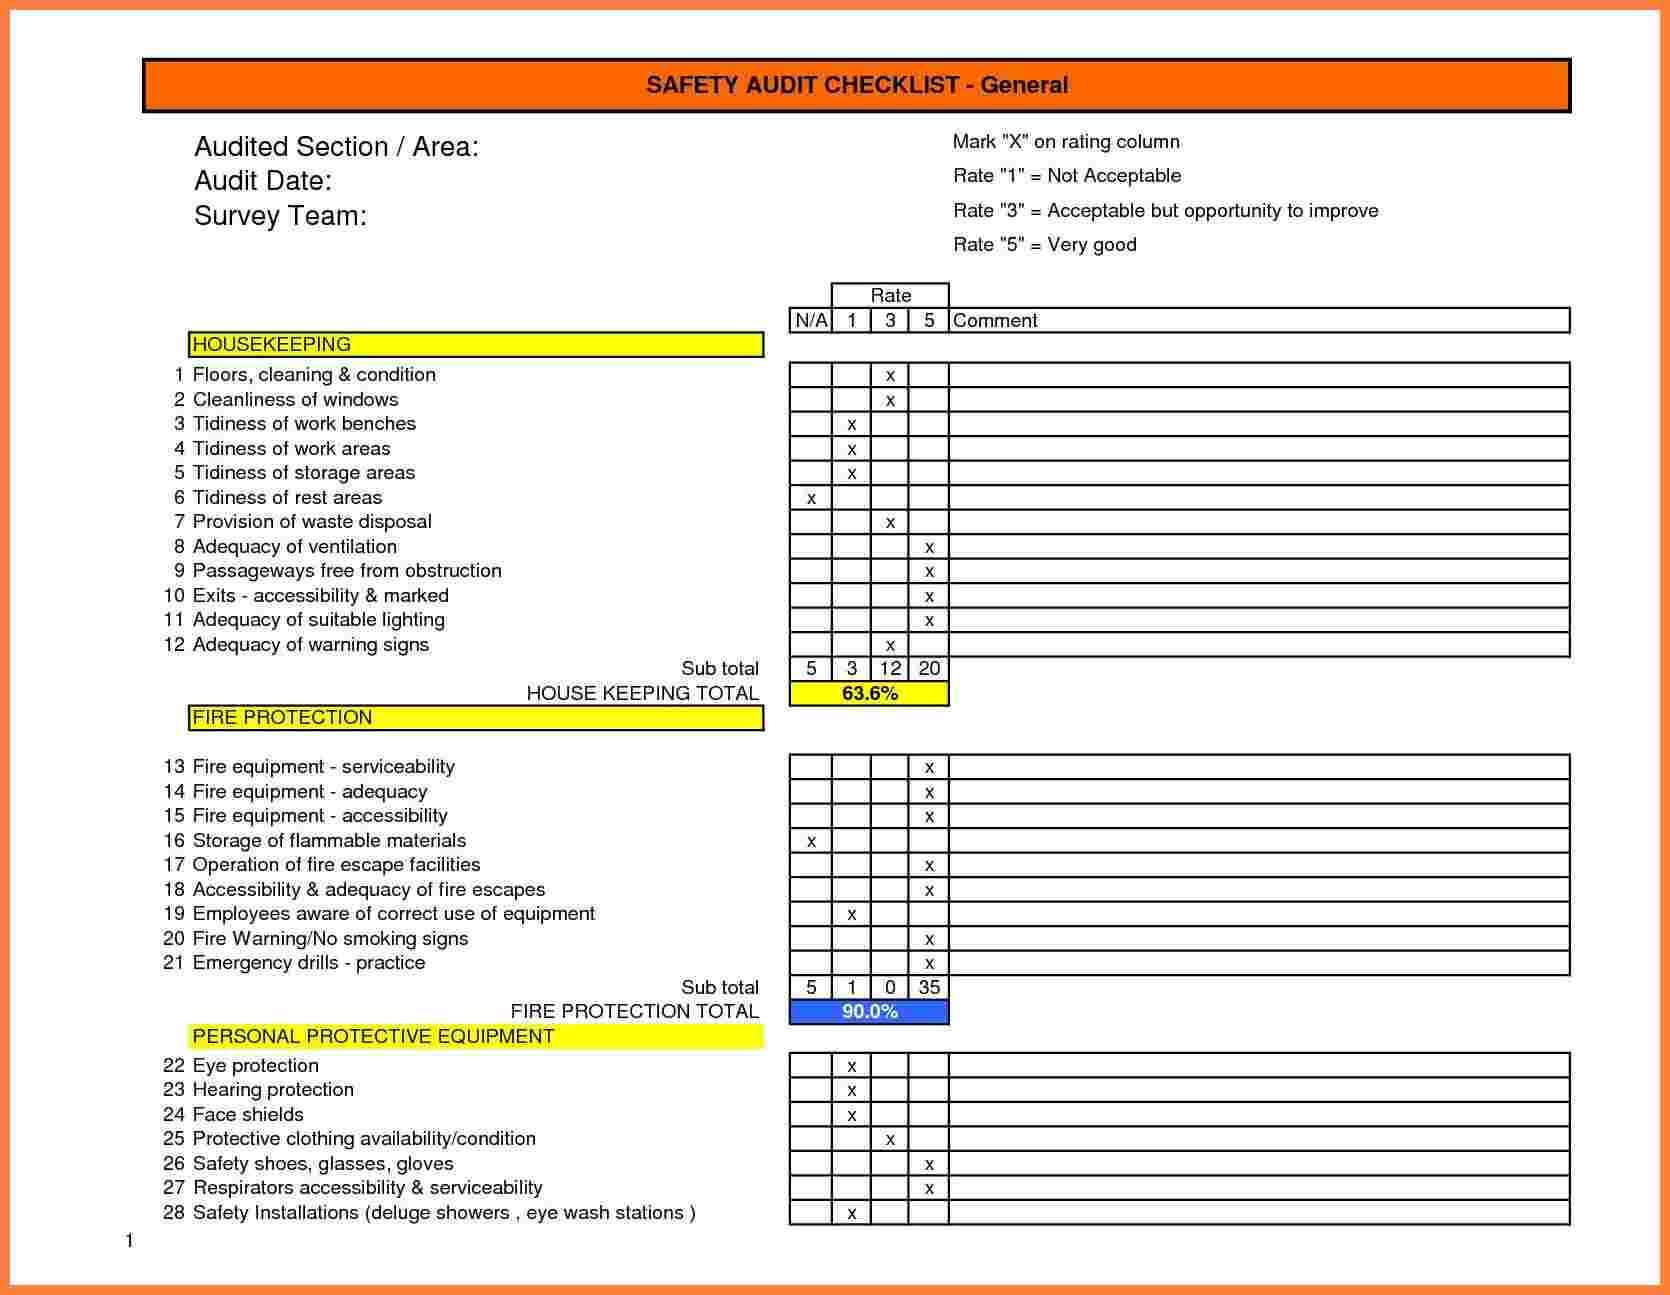 Image Result For Warehouse Health And Safety Audit Form Throughout Data Center Audit Report Template